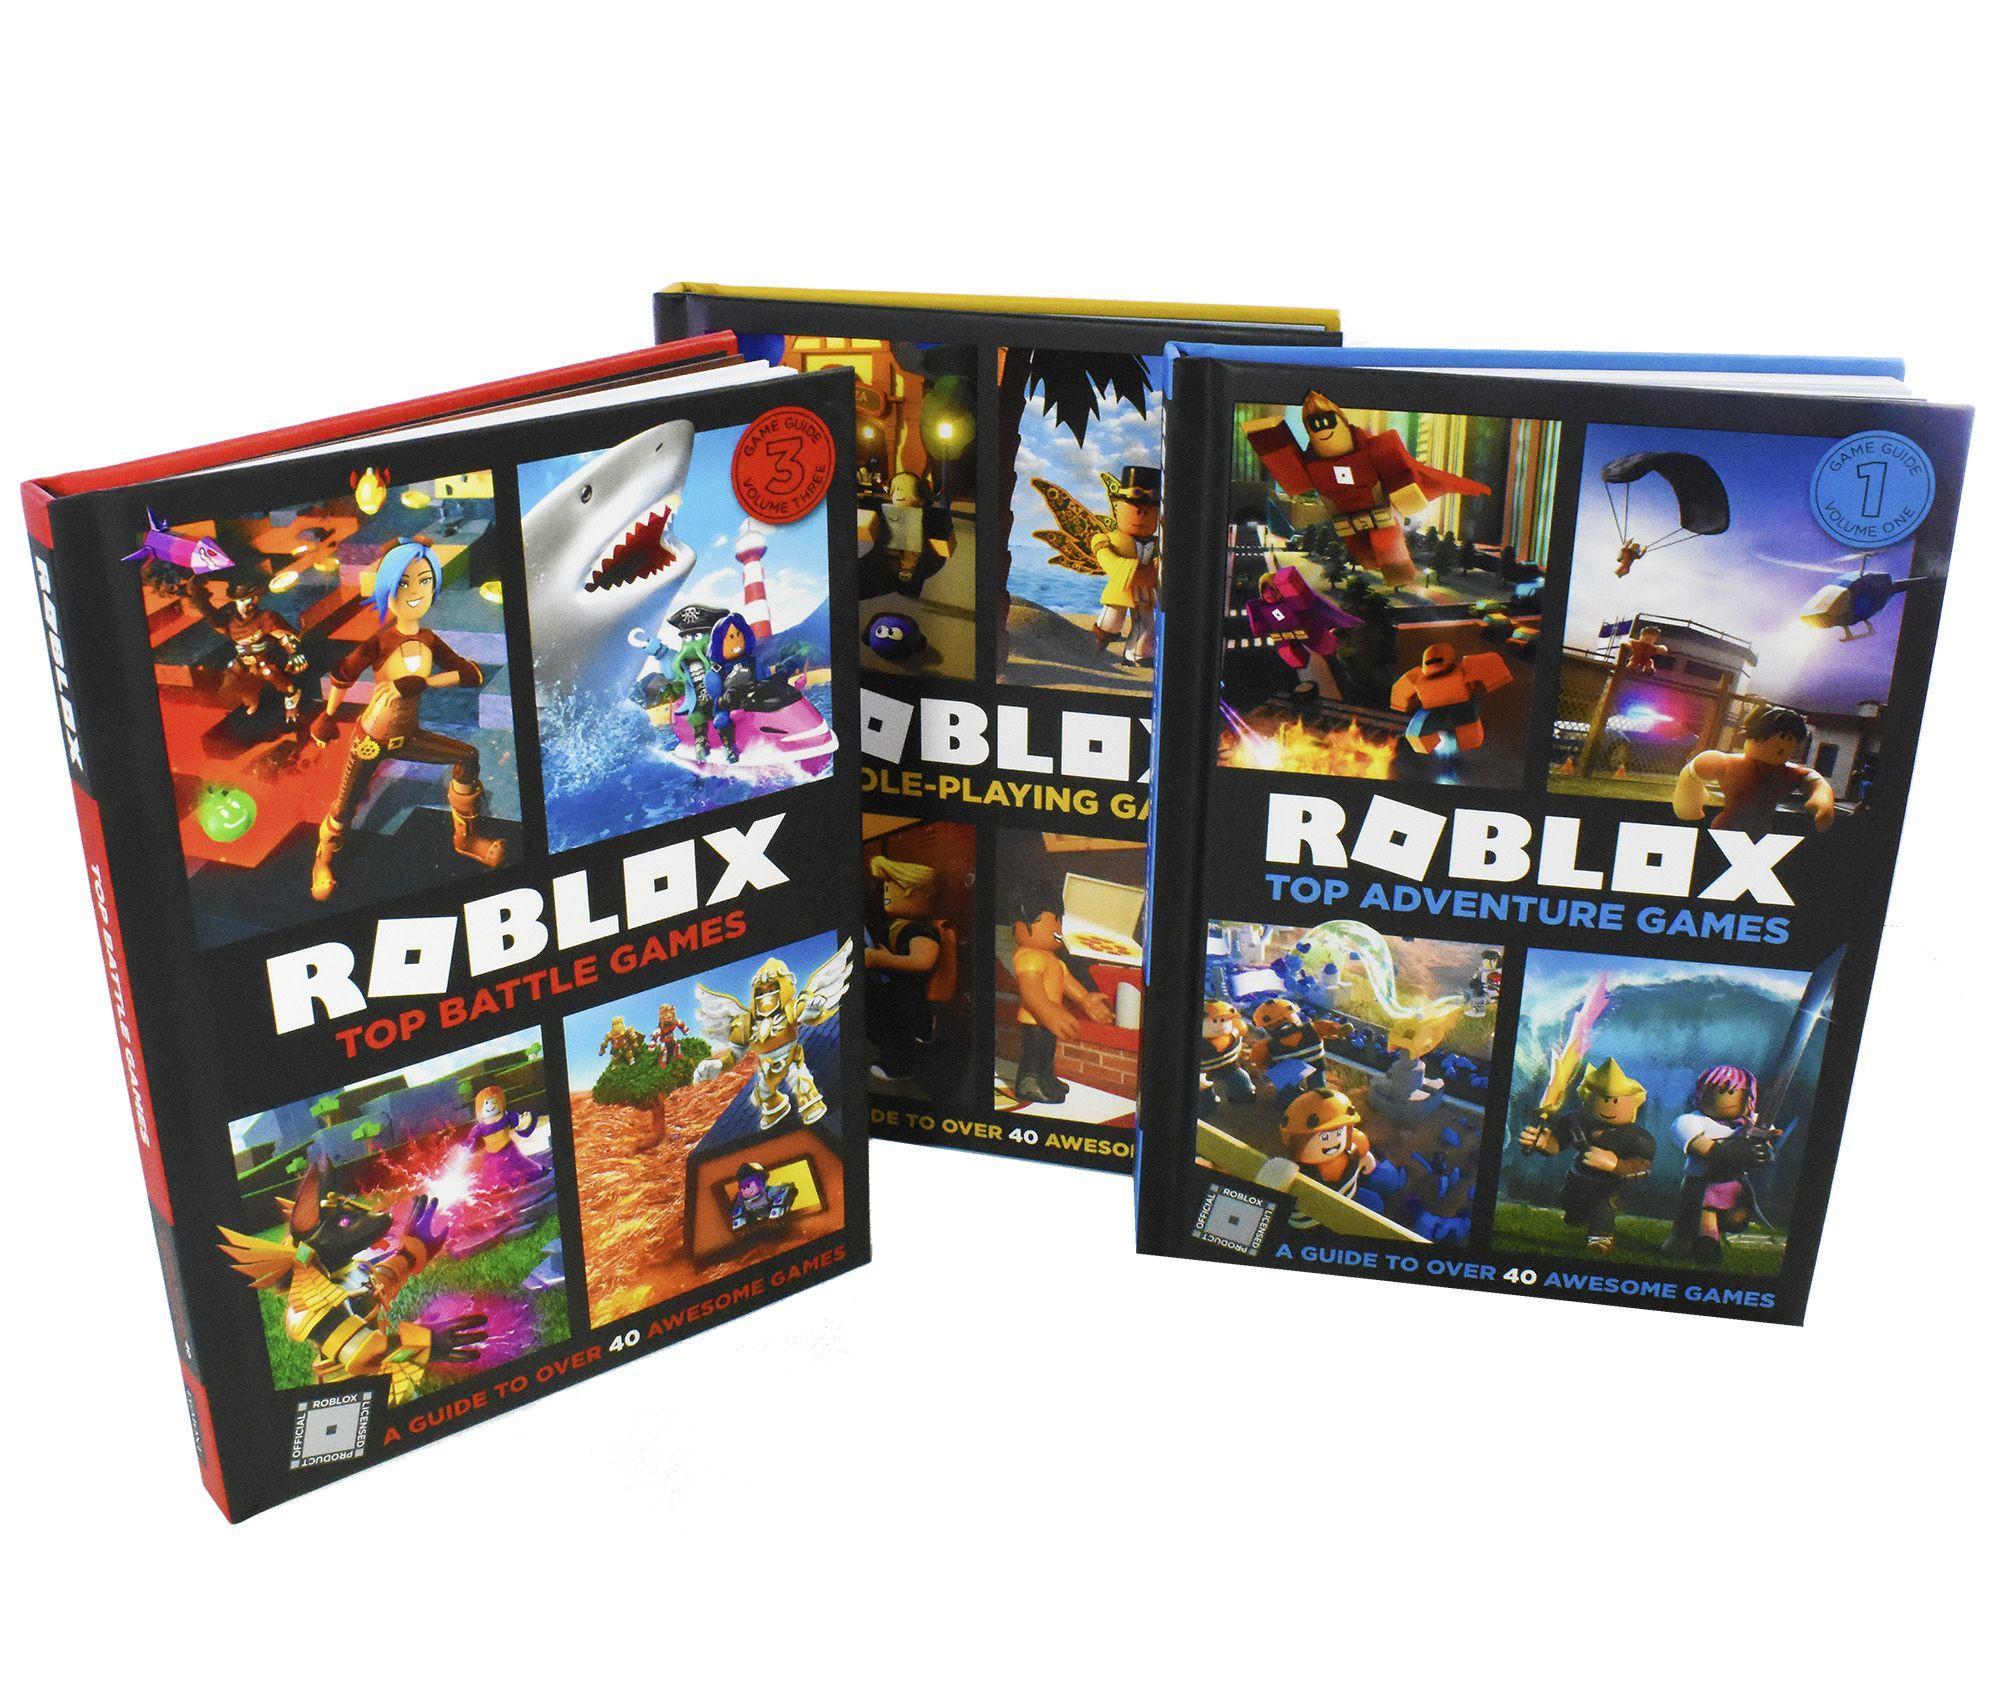 Roblox Ultimate Guide 3 Books Children Collection Hardback By David Jagneaux St Stephens Books - roblox the essential guide by david jagneaux 9781629376332